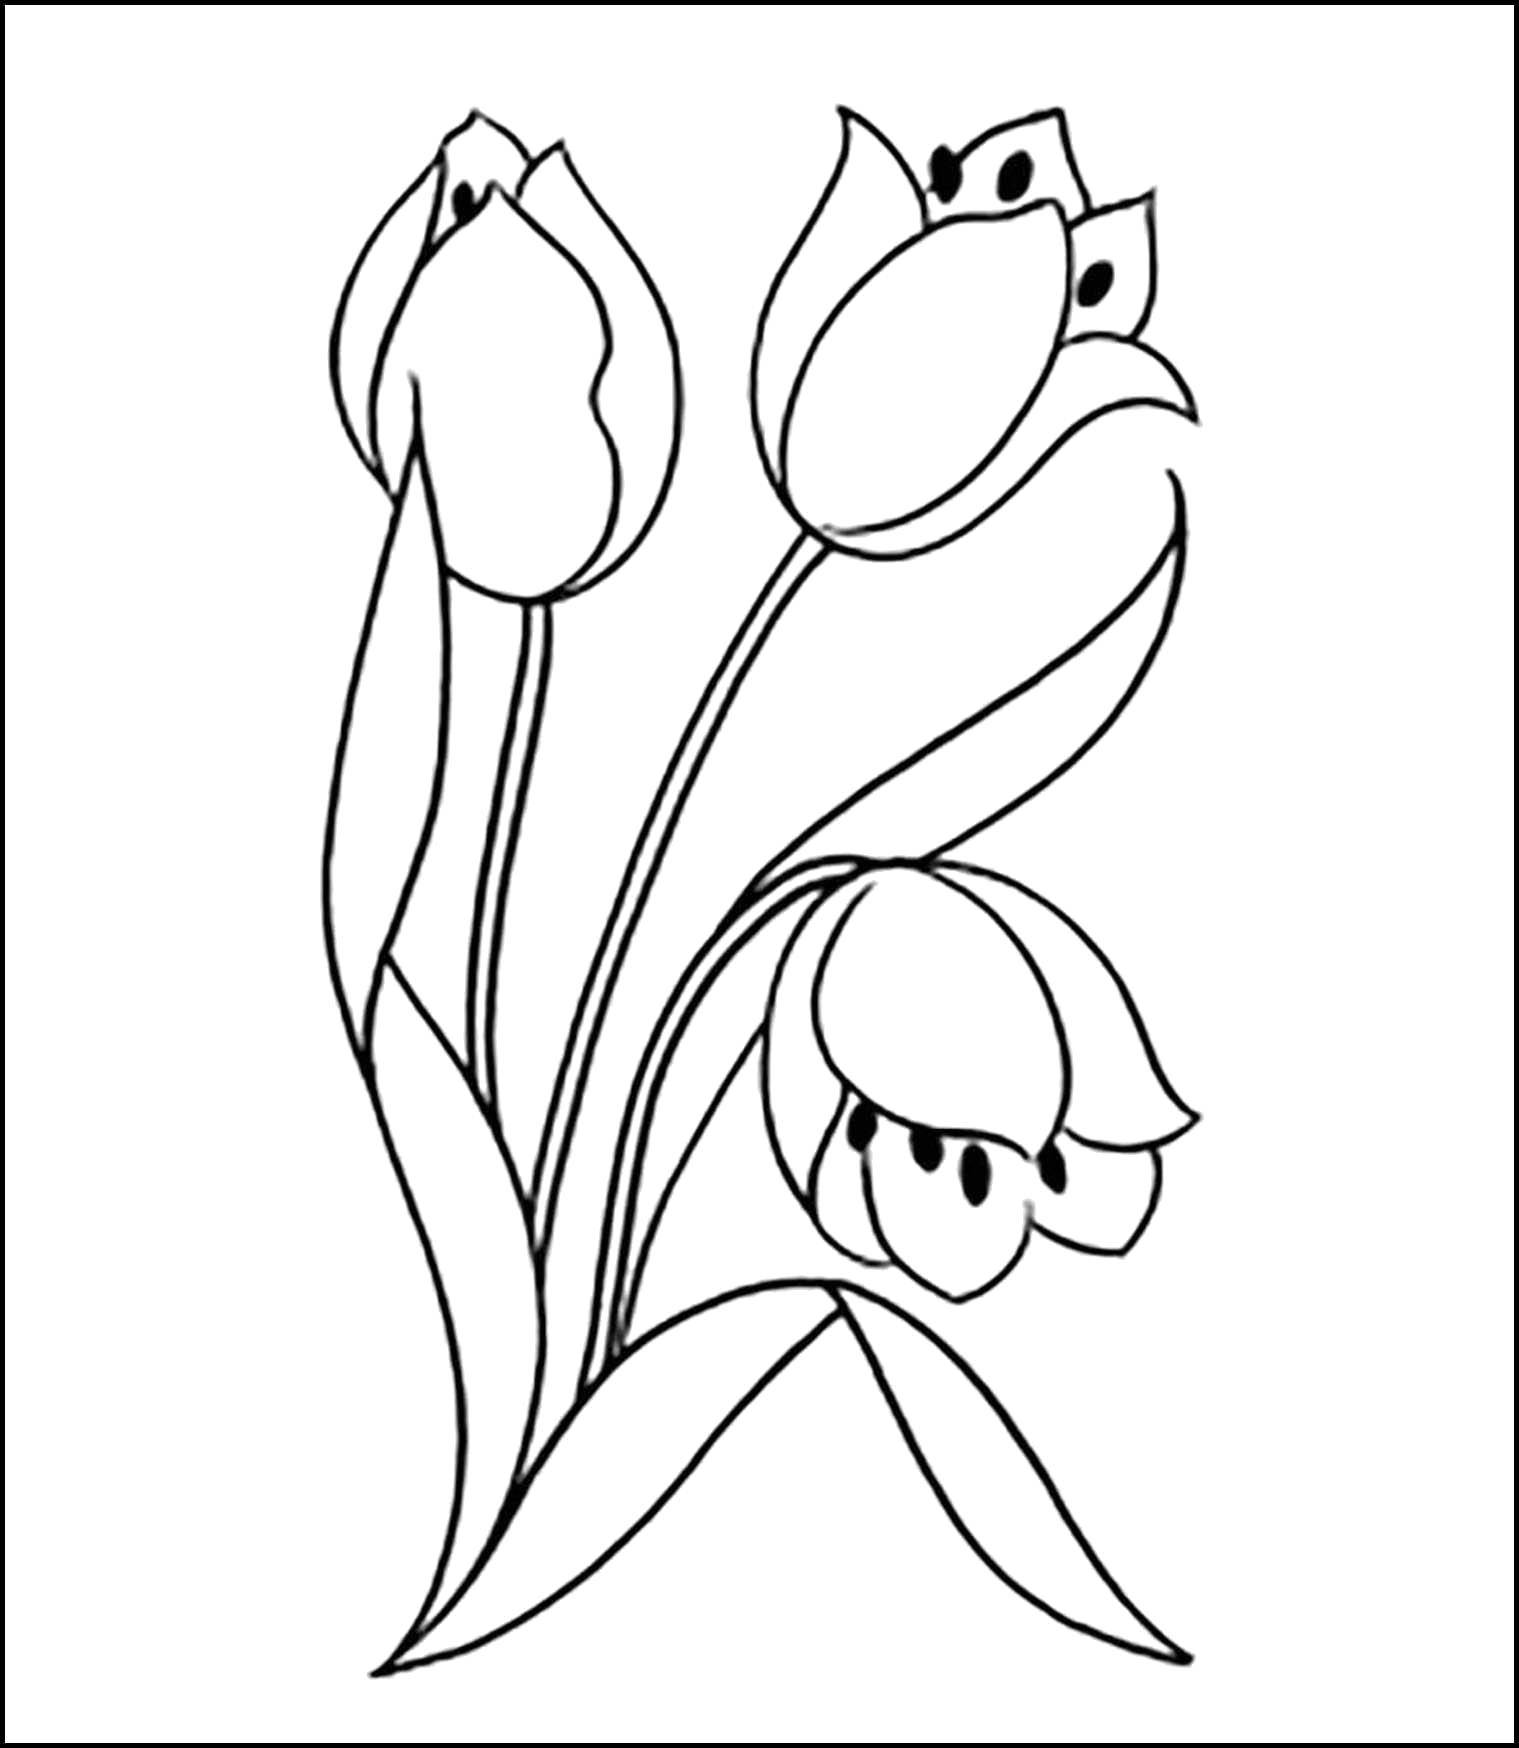 Coloring Tulips. Category flowers. Tags:  Flowers, tulips.